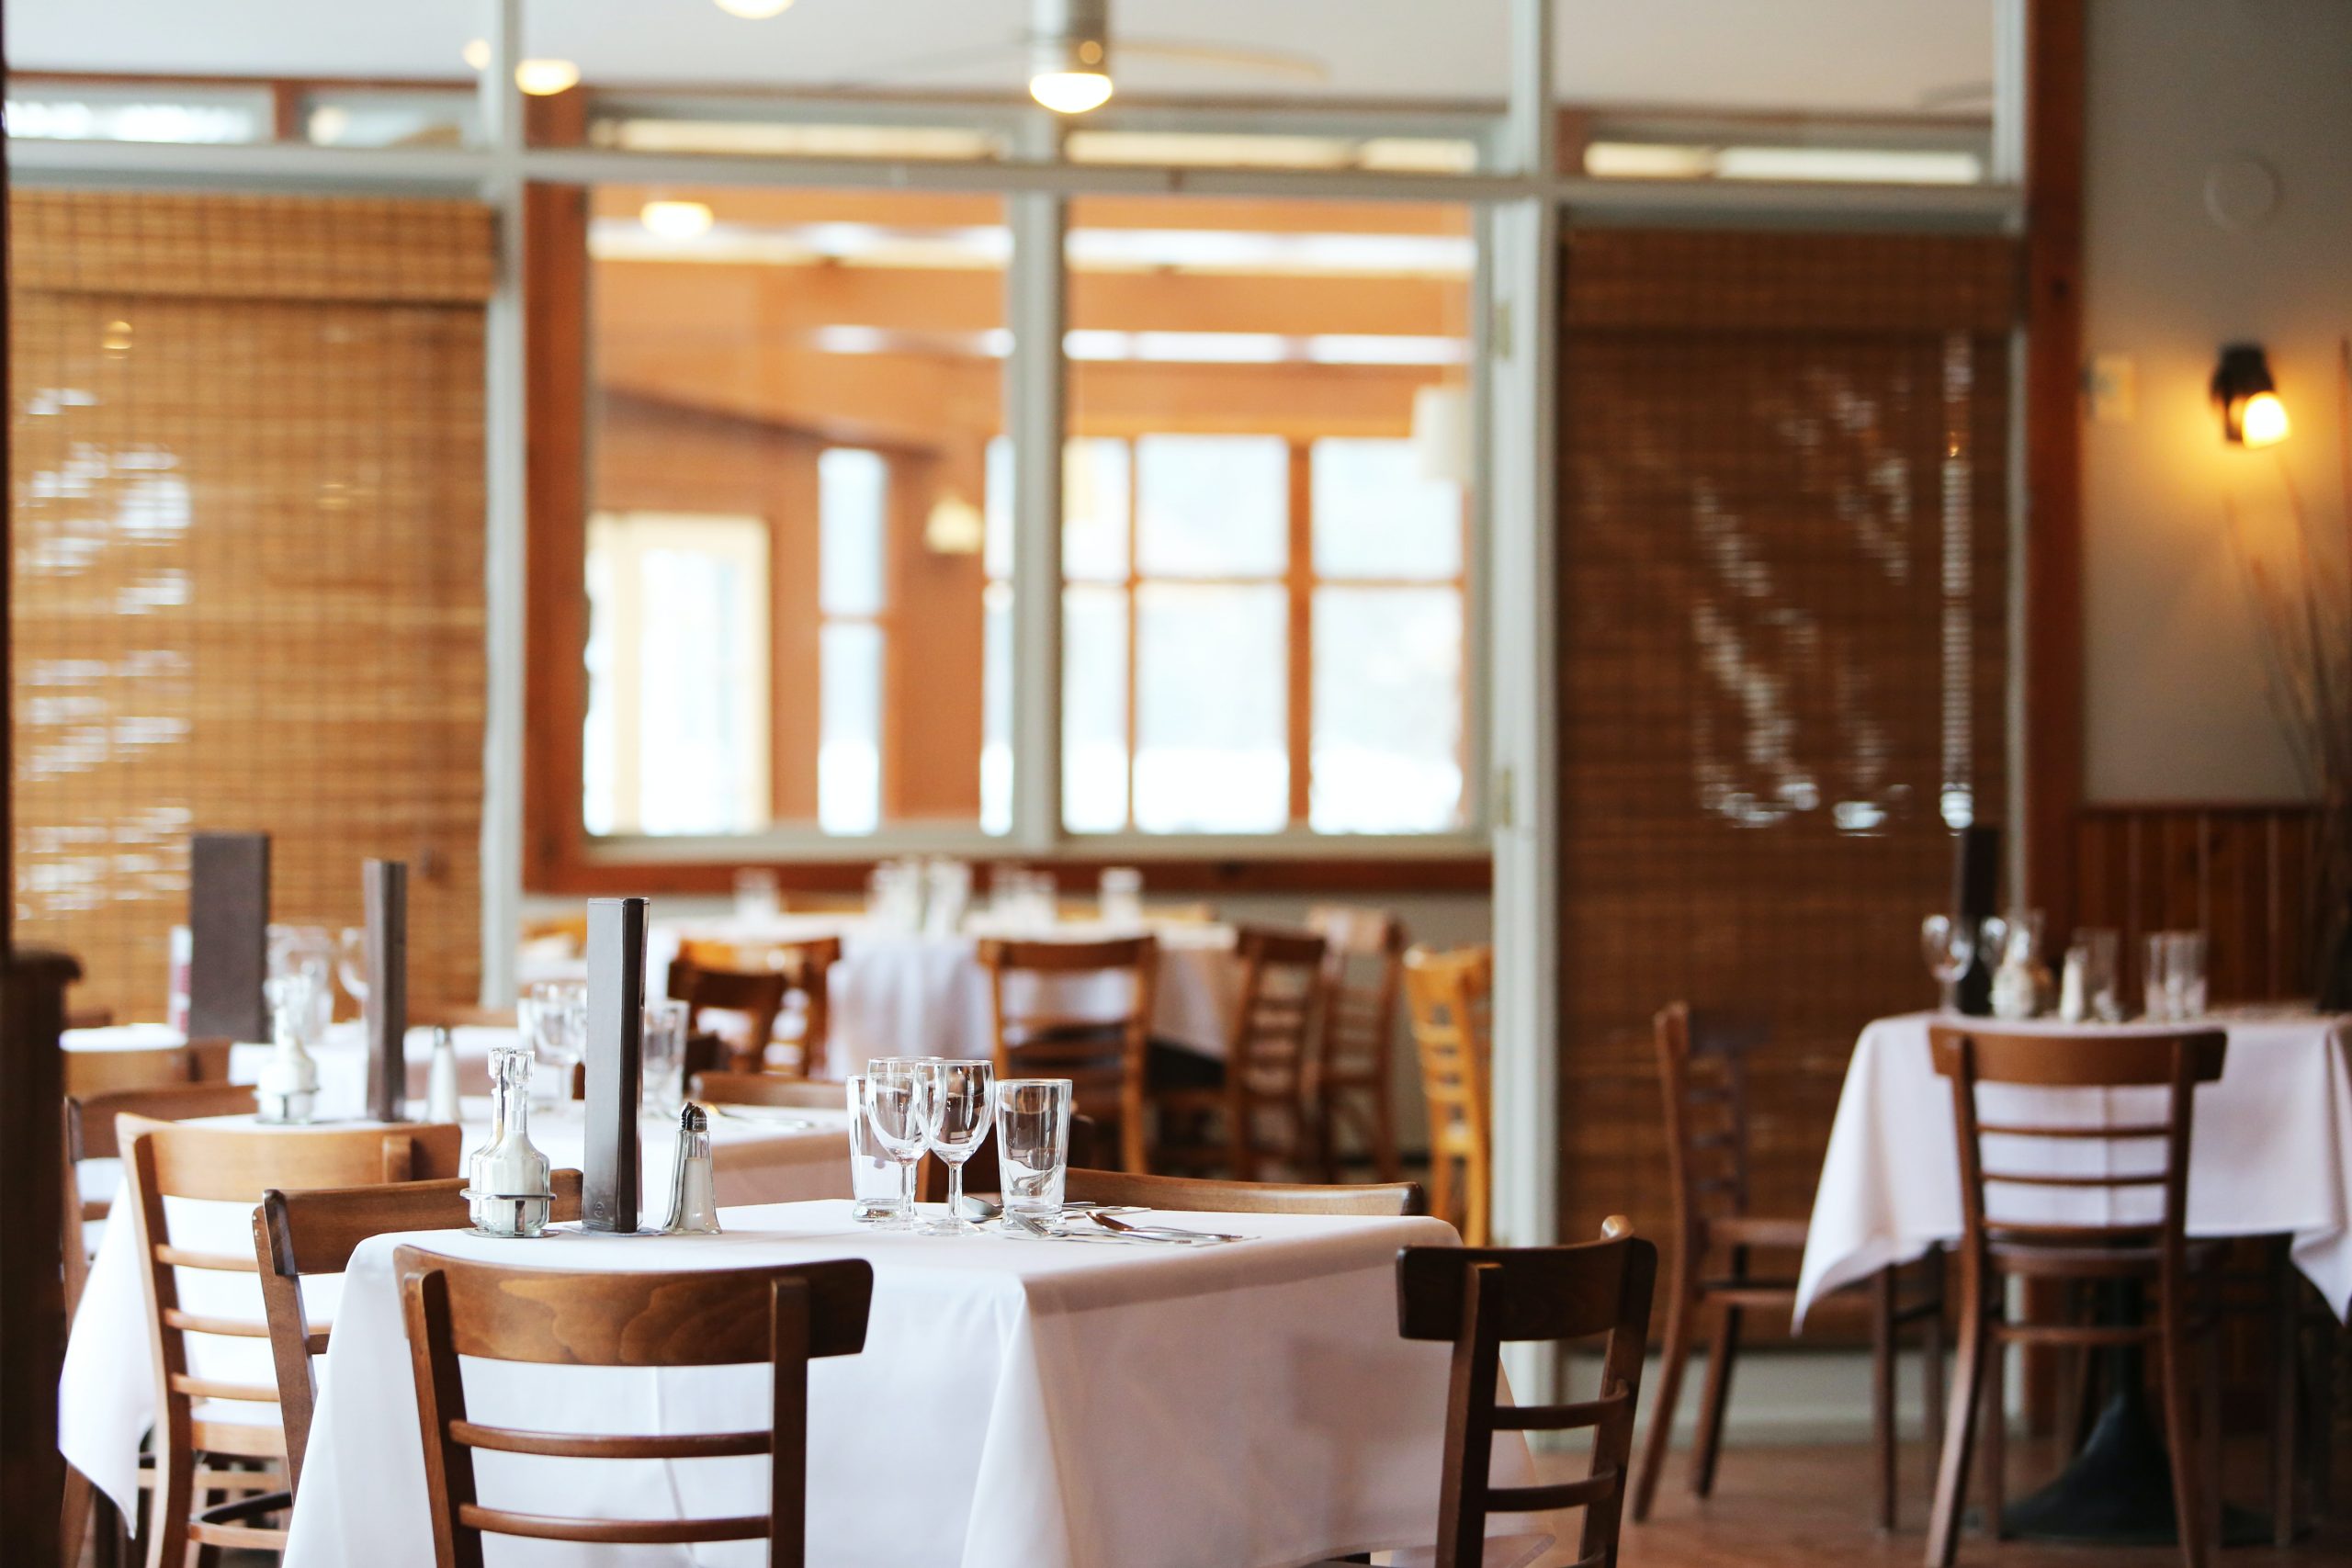 Restaurant Accounting Services in Annandale